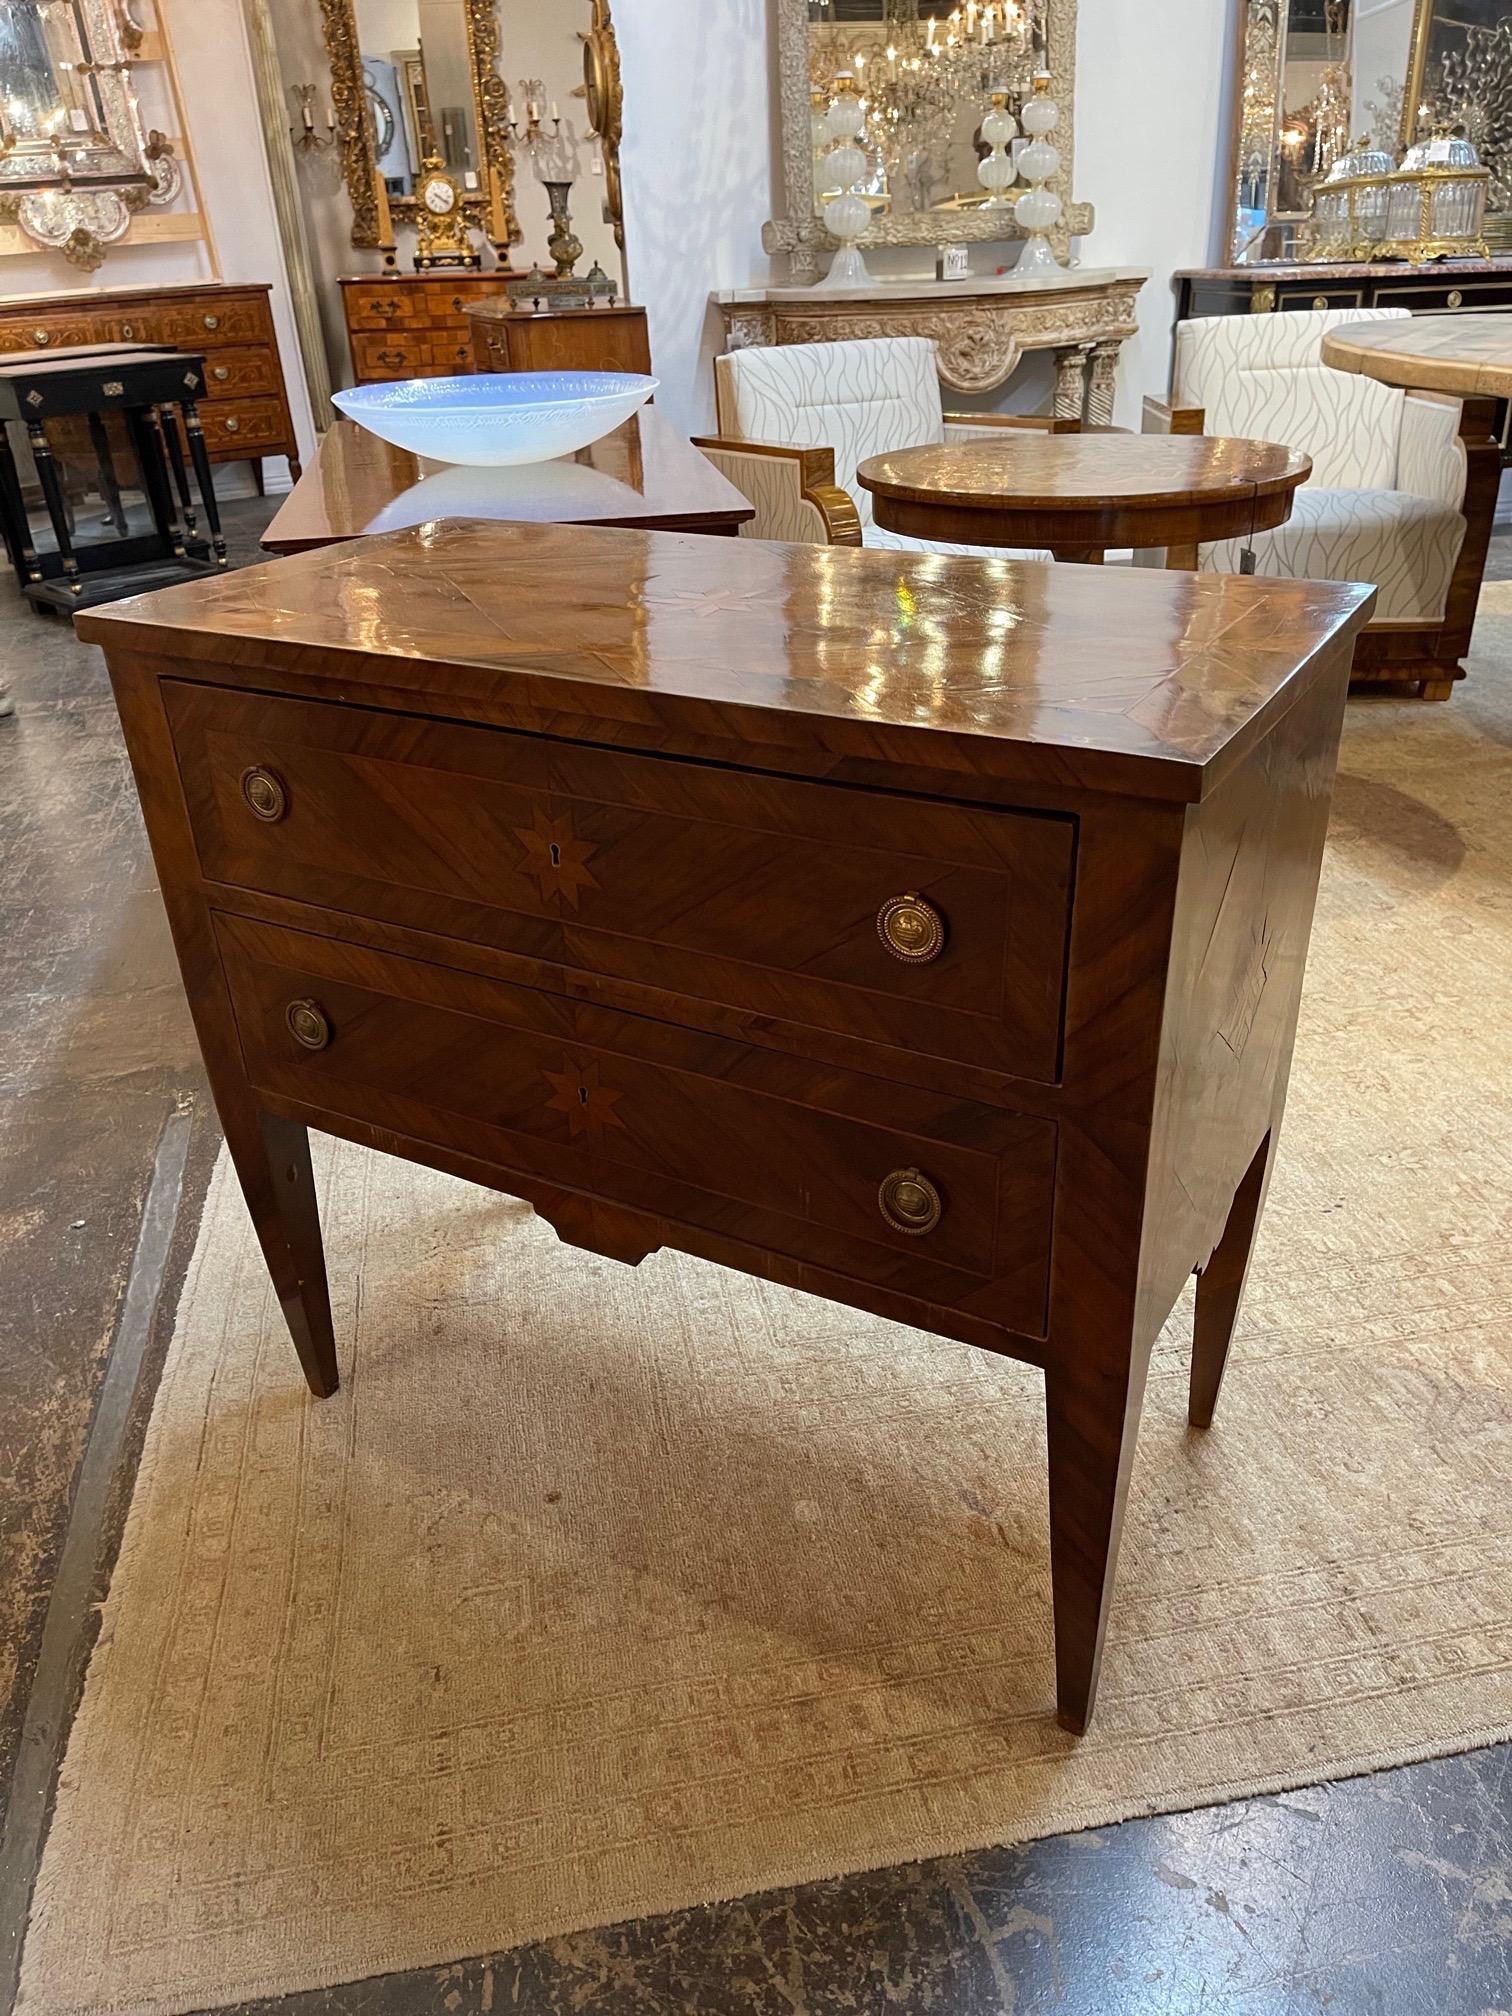 Gorgeous 18th century neoclassical walnut 2-drawer chest. Beautiful inlaid wood including a star shape. The finish is amazing as well. A beautiful piece!!